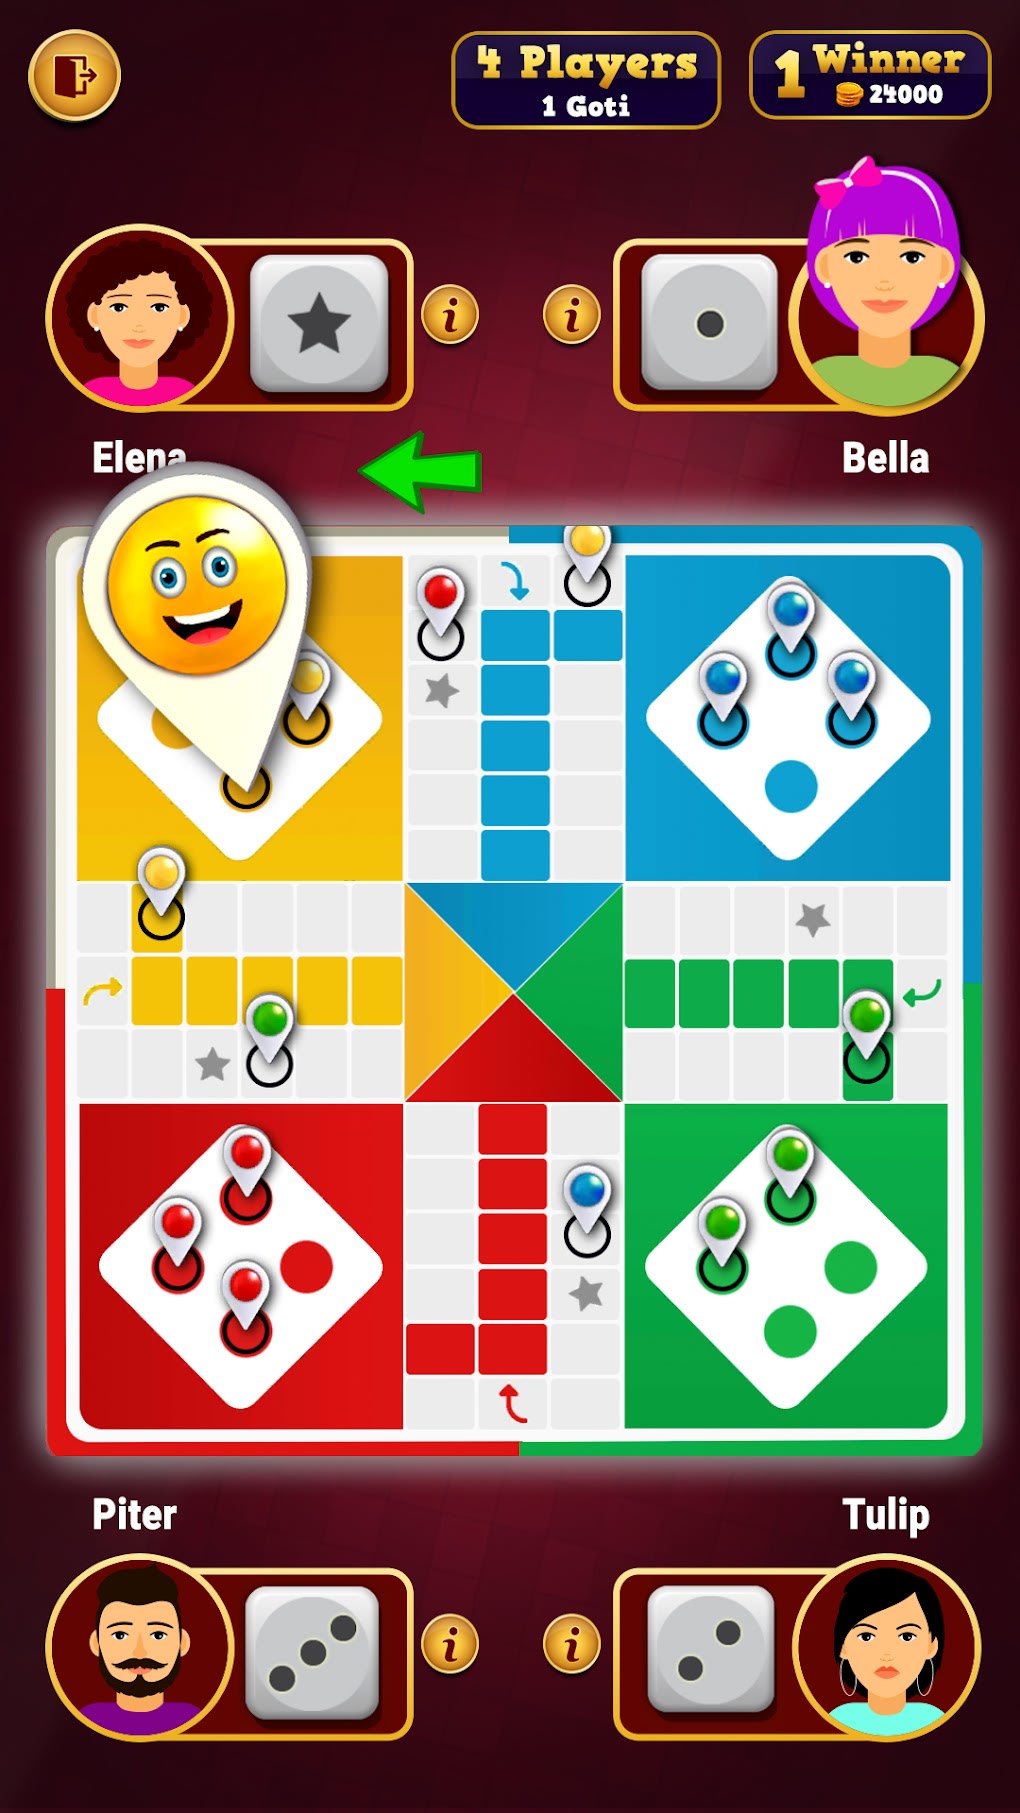 Ludo Goti APK for Android Download